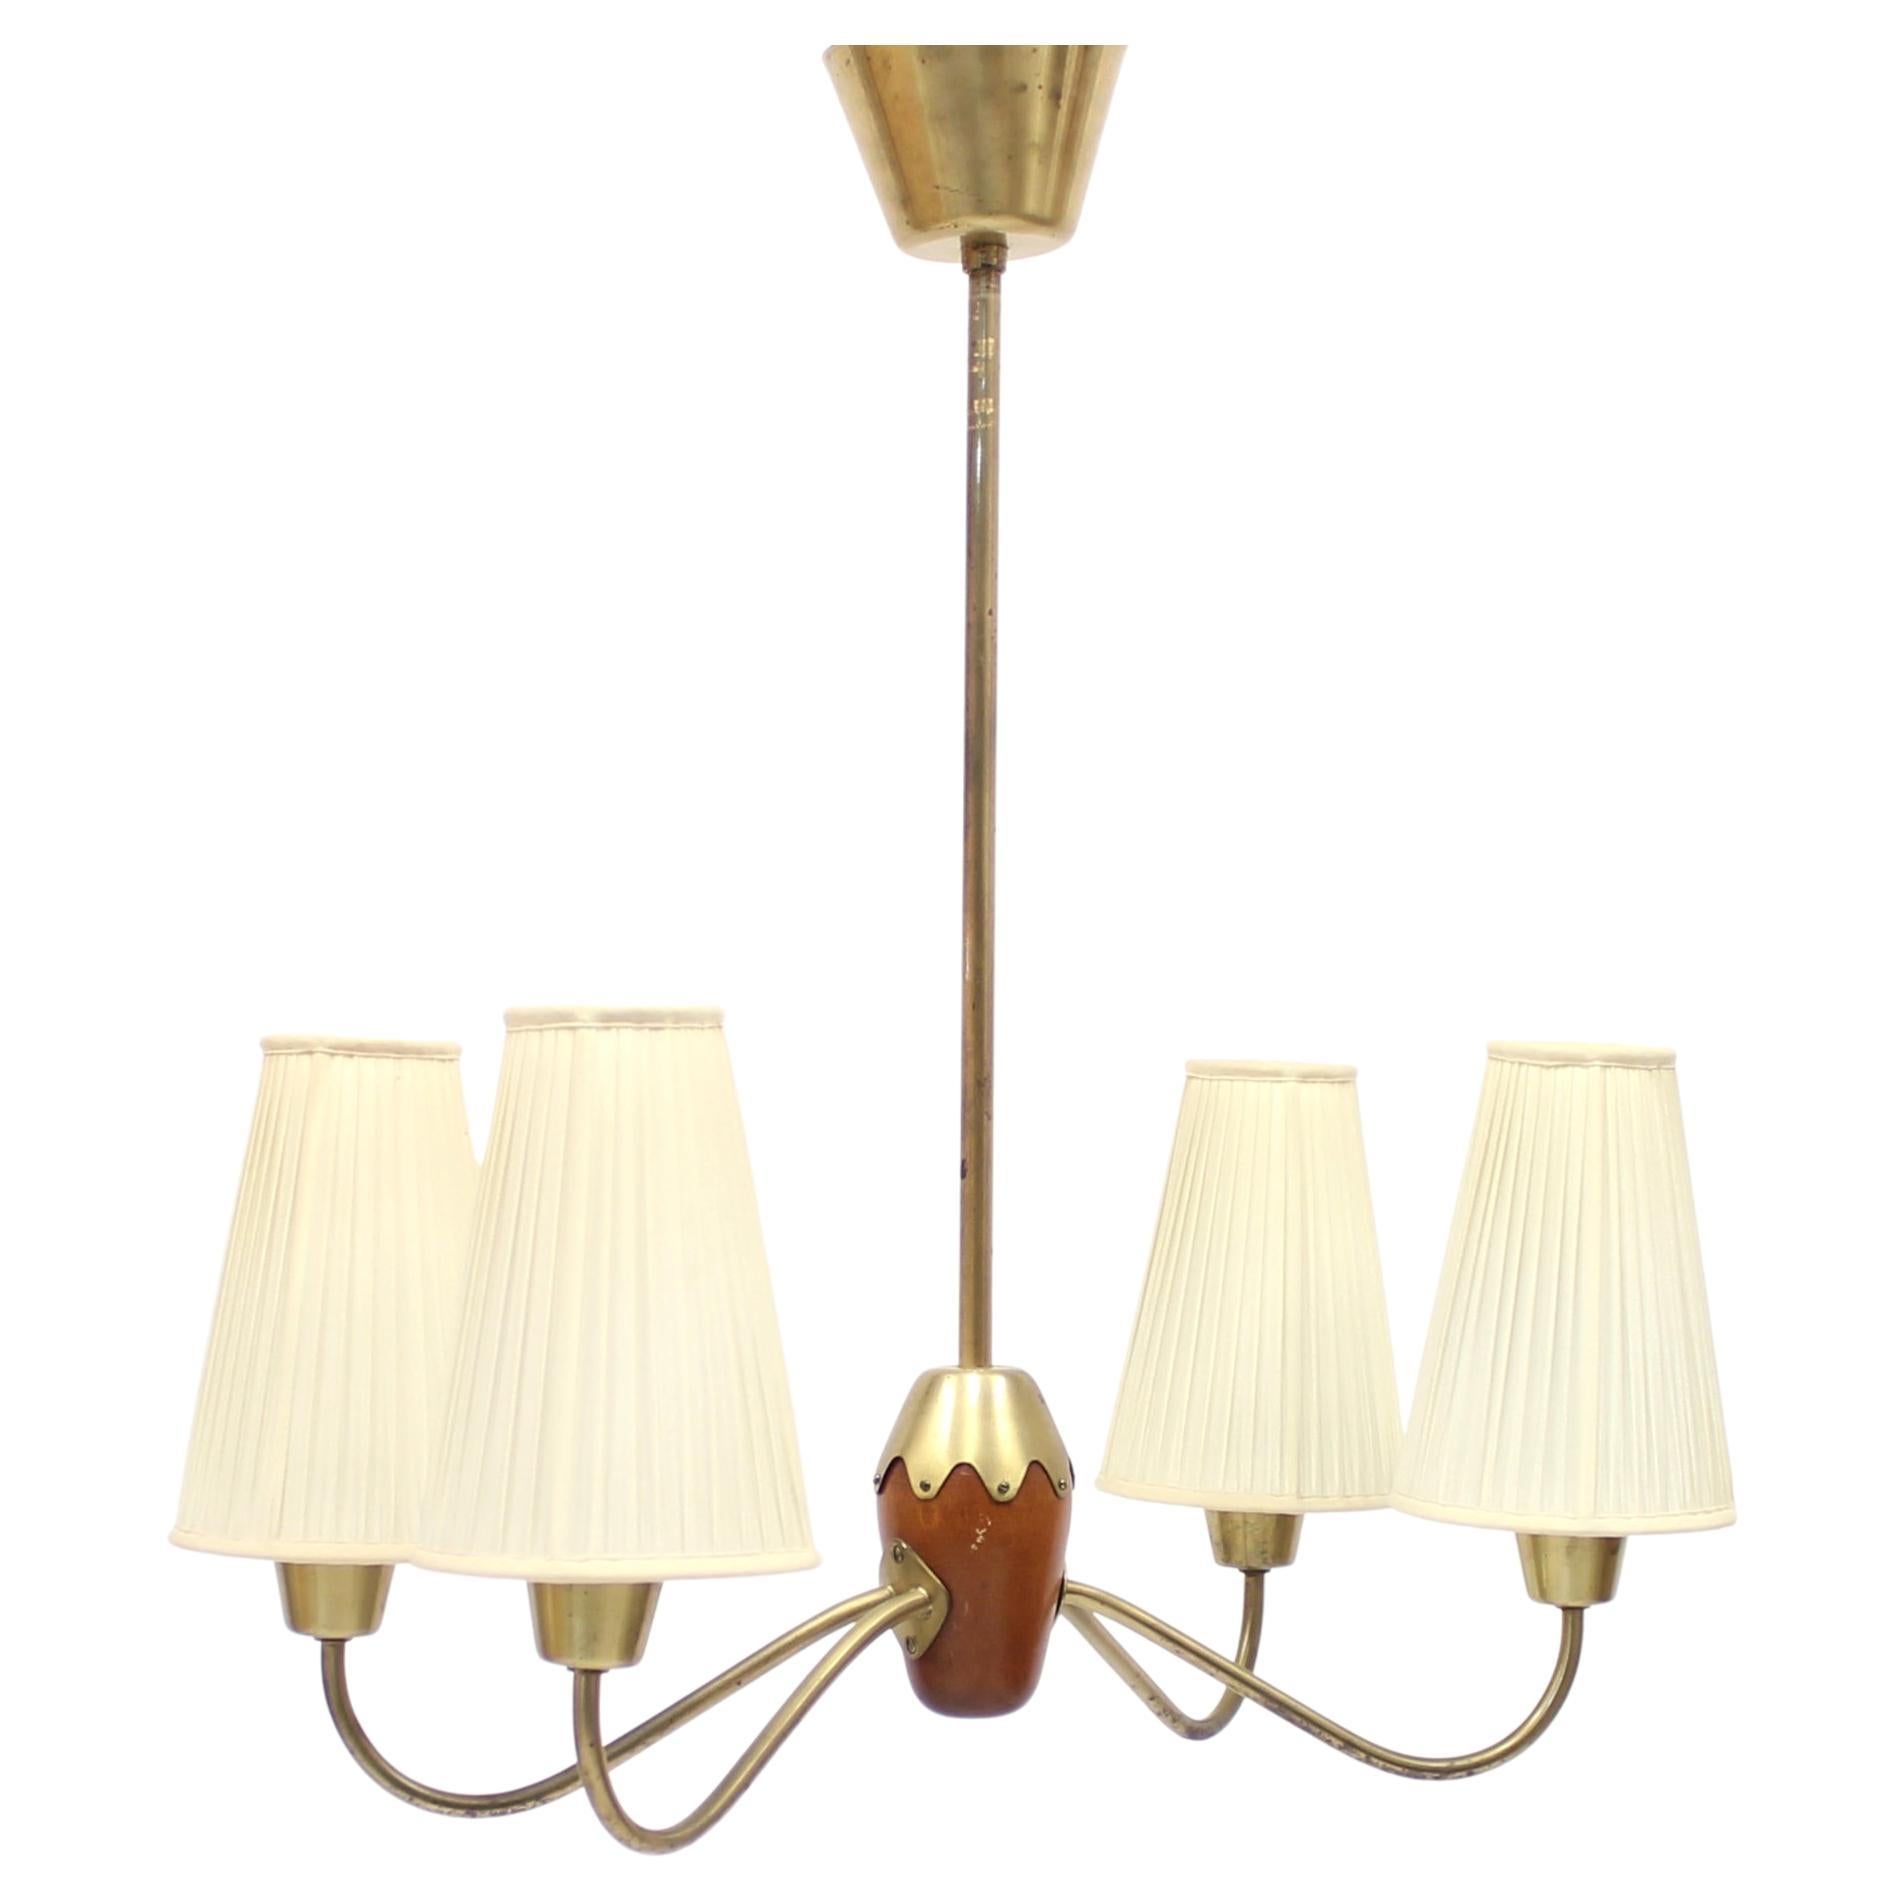 4-Light Ceiling Lamp, Attributed to ASEA, 1950s